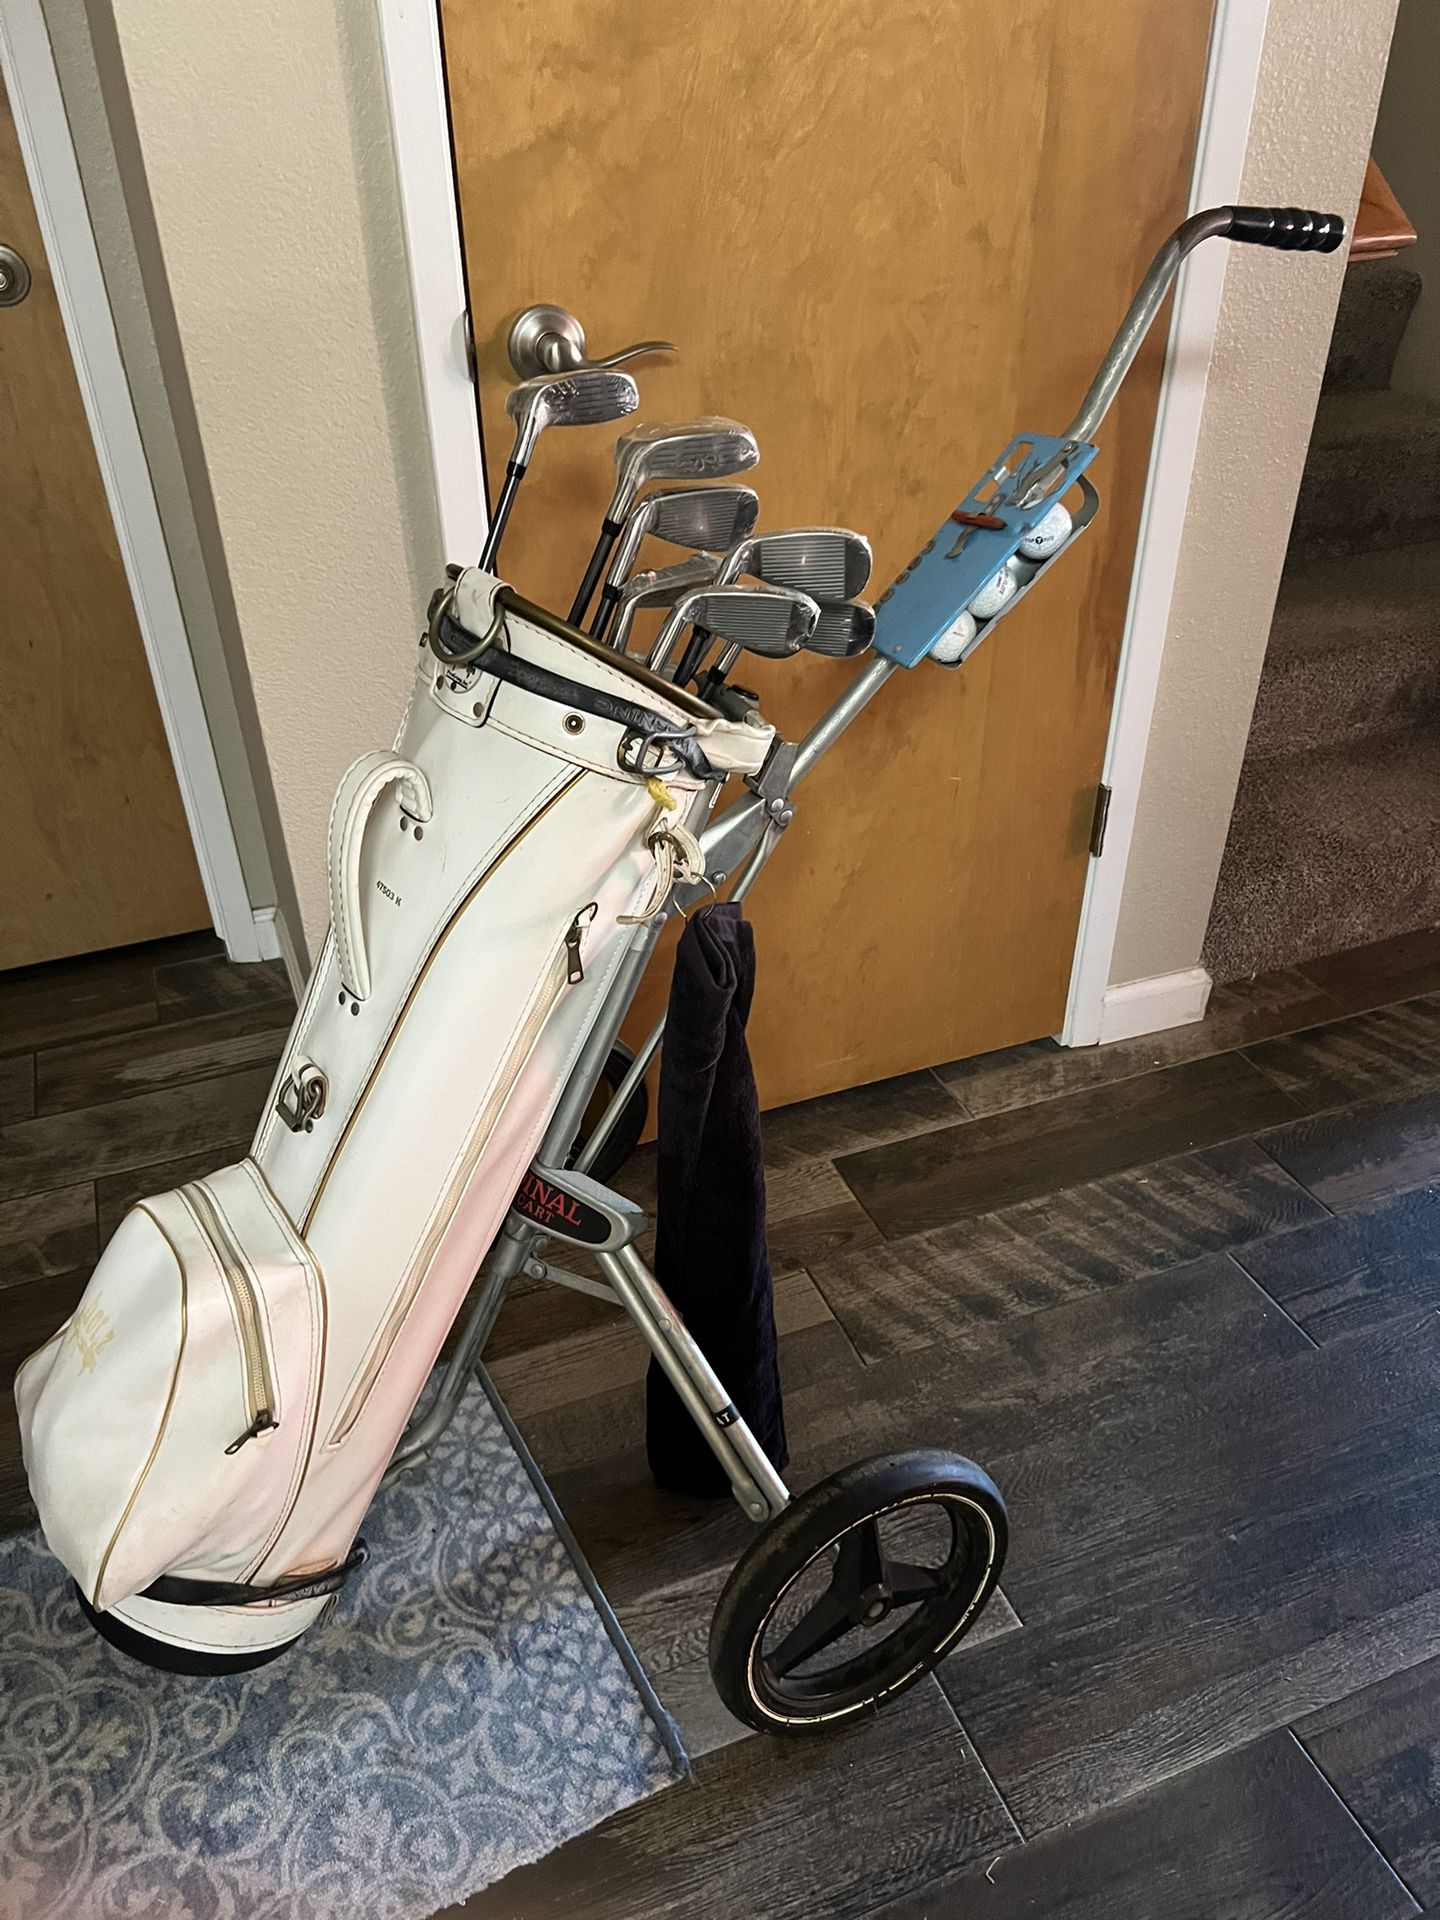 Amazing condition HOT Z Golf Bag with extendable wheel base with SEALED Power Play Golf Clubs.  MANY NICE GOLF BALLS IN LARGE POCKET.  $200